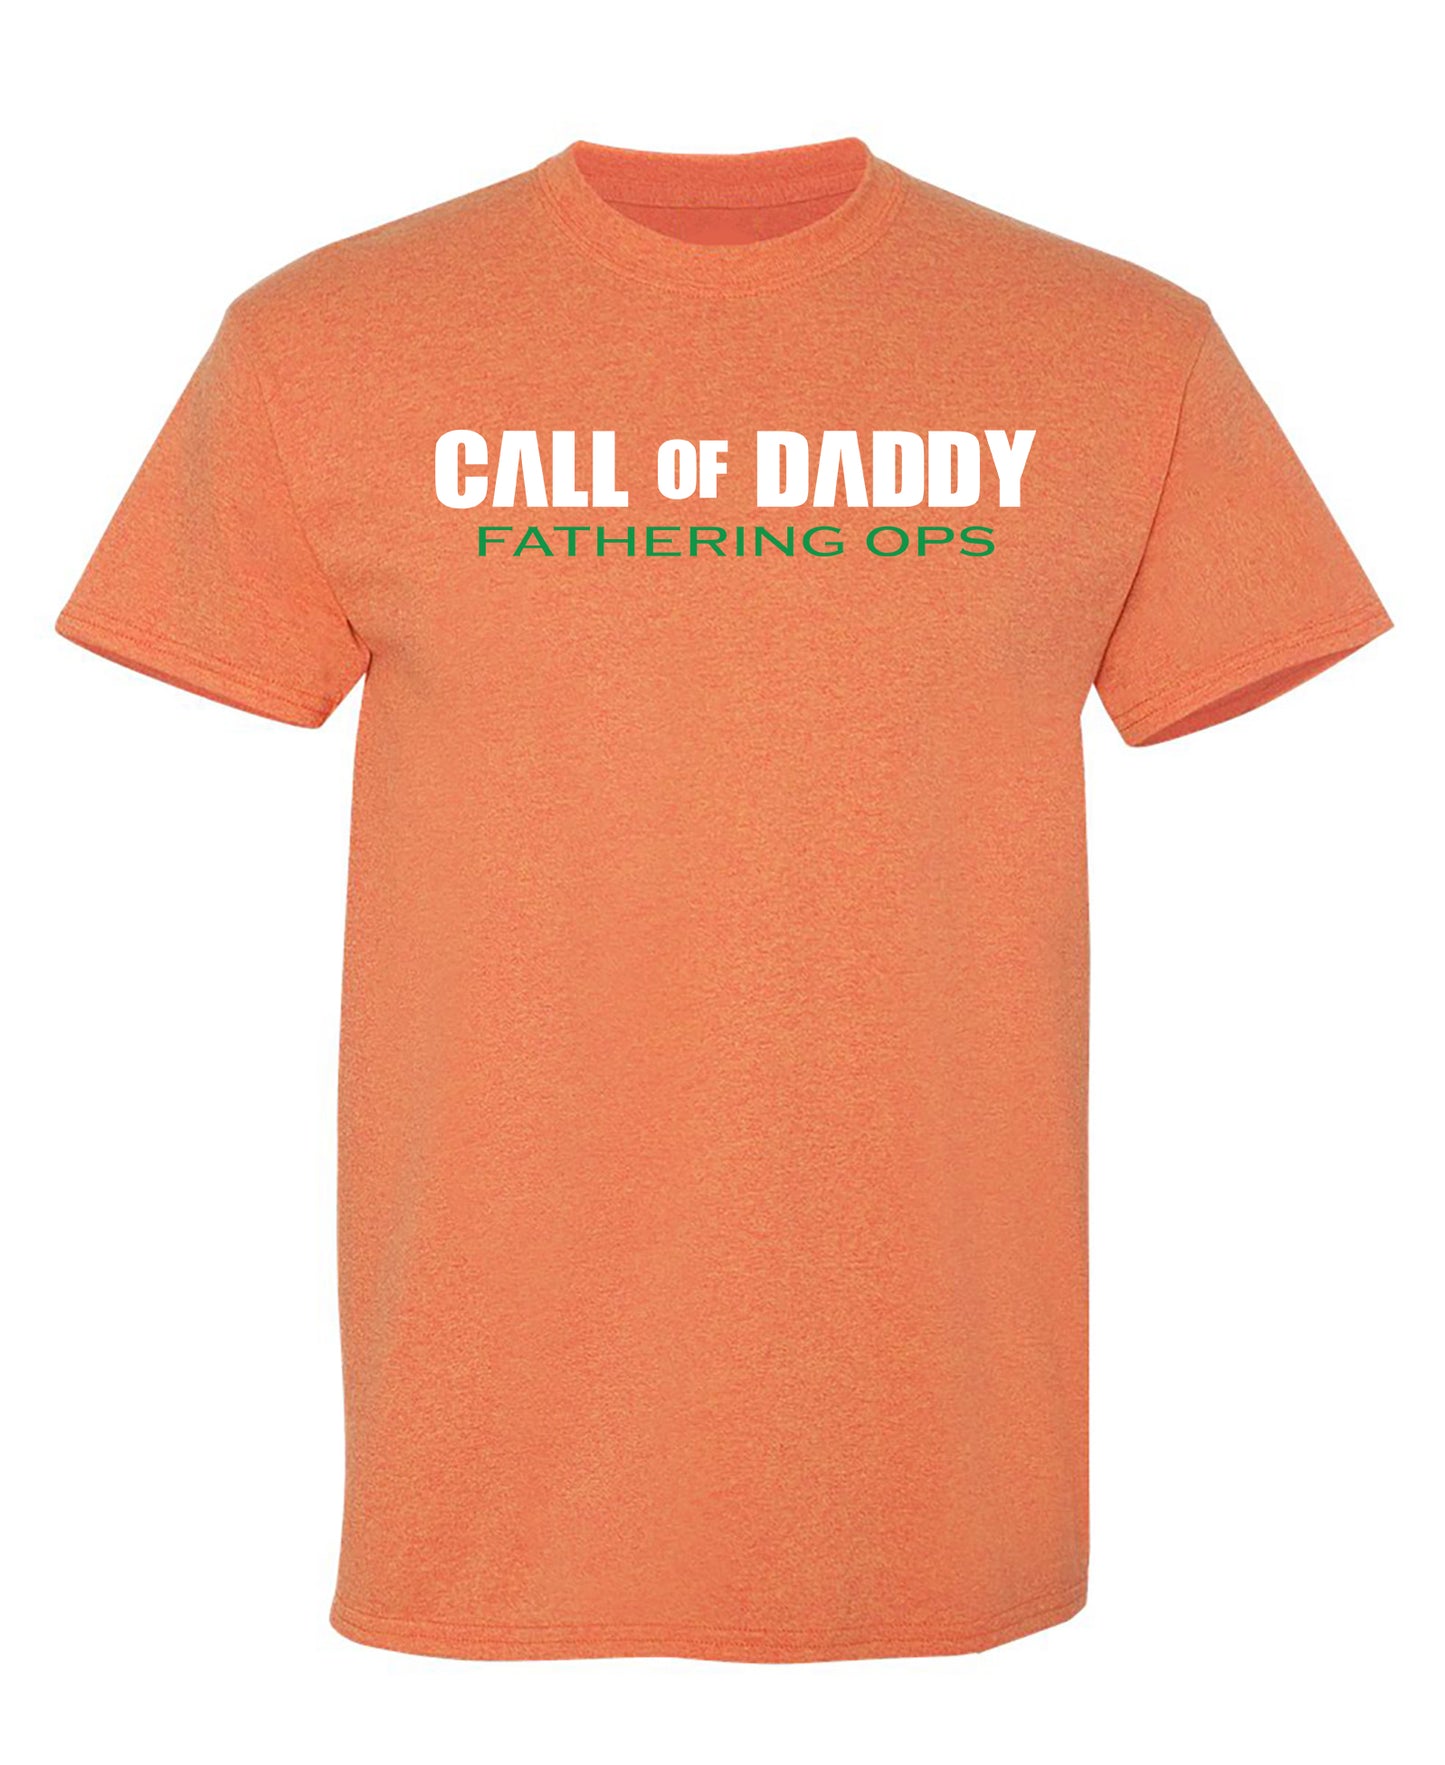 Call Of Daddy, Fathering Ops